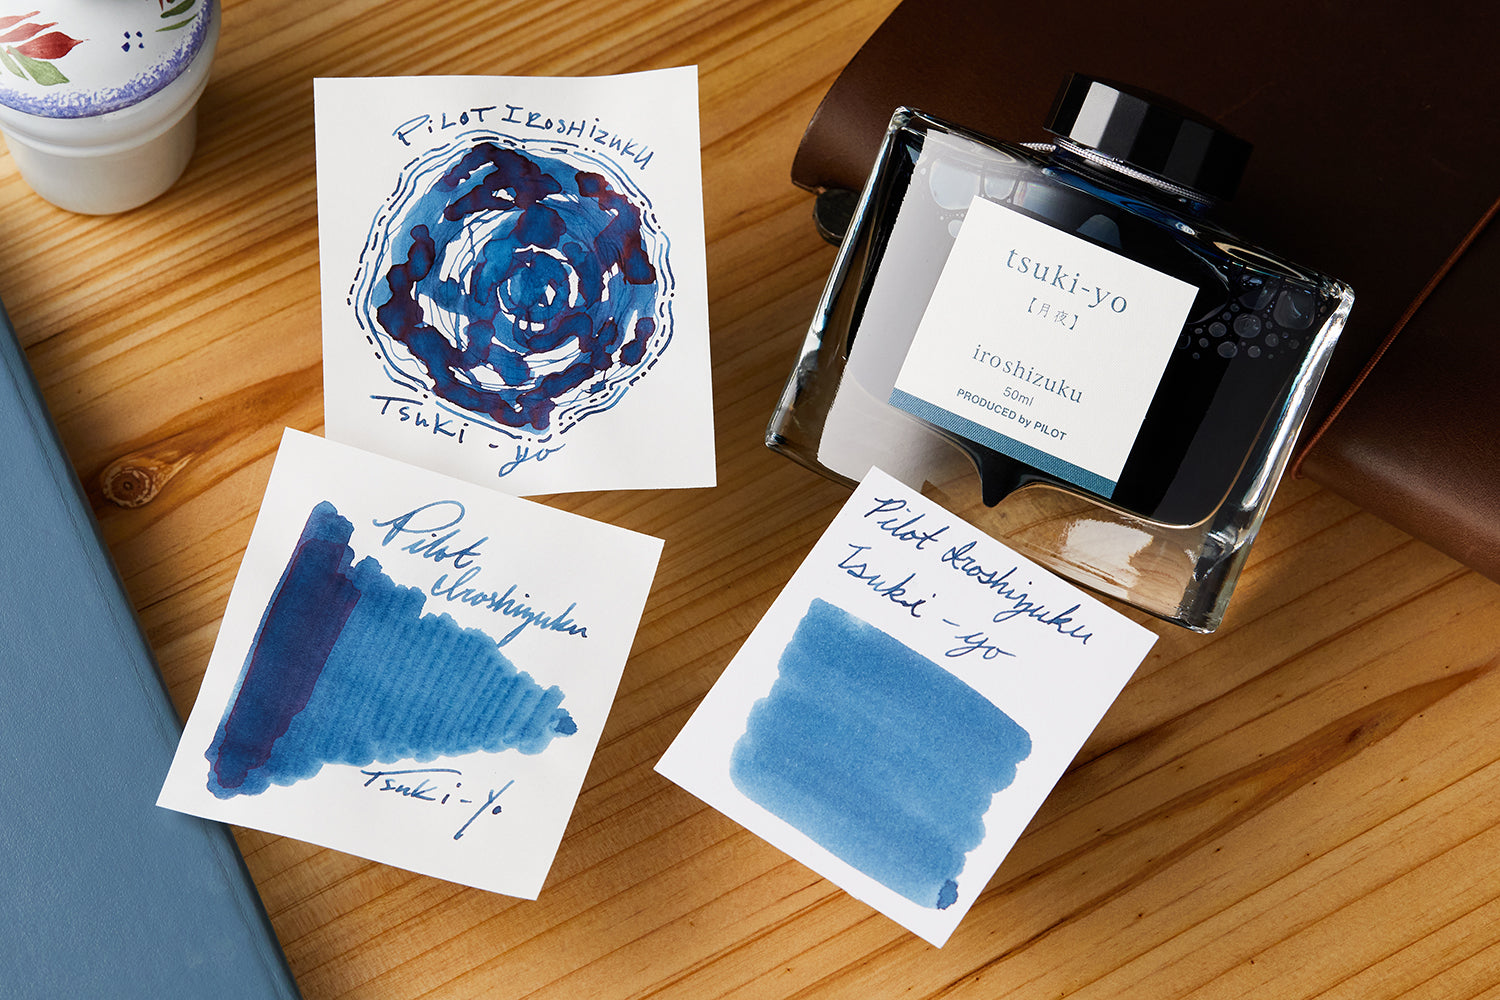 Pilot Iroshizuku Ink Line: Discussion Thread - Inky Thoughts - The Fountain  Pen Network